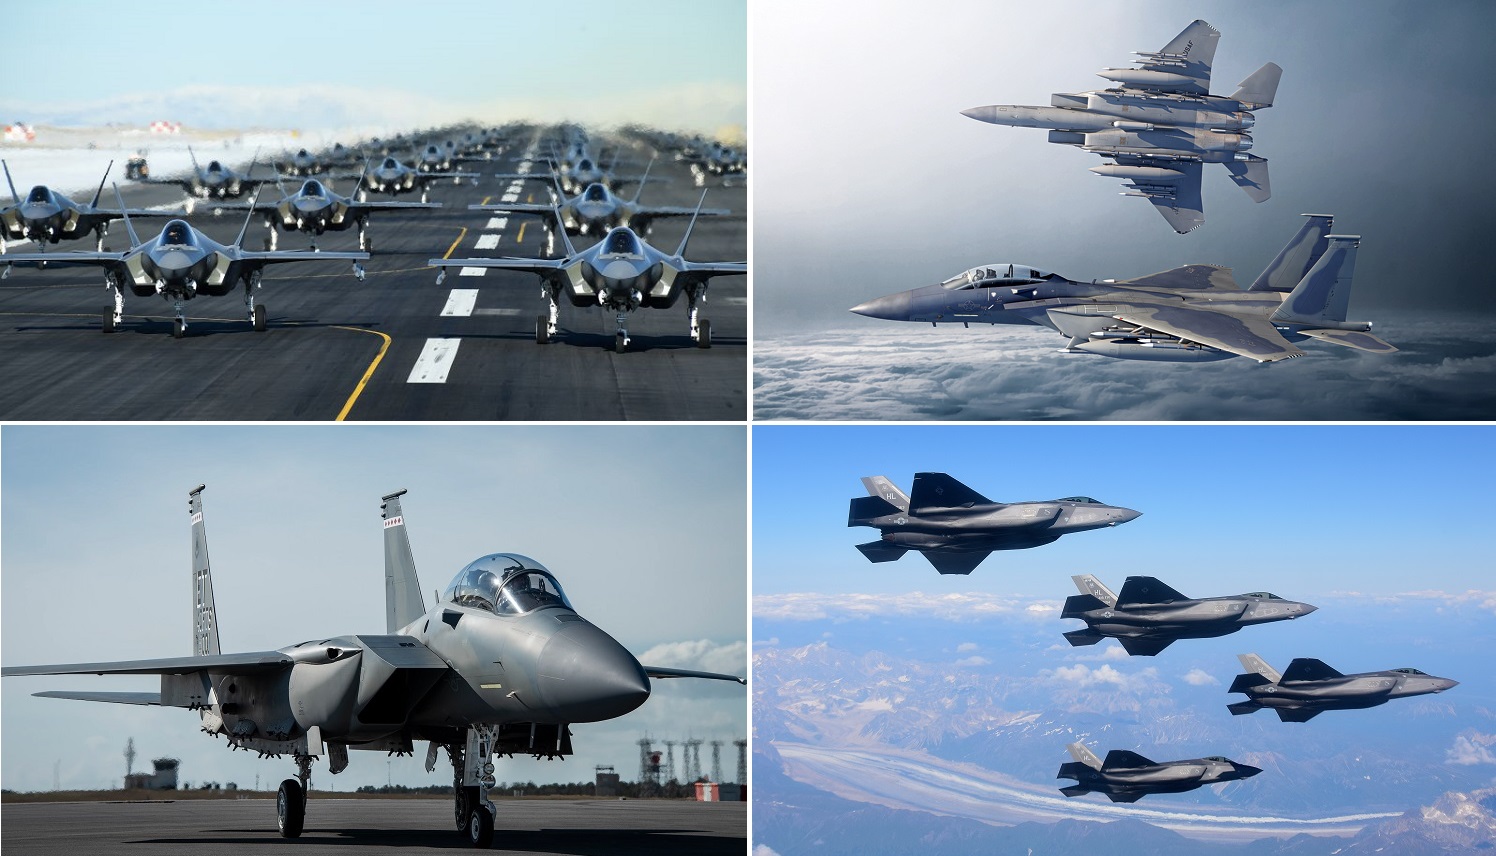 The US Air Force is to acquire 72 fighter jets for the first time in recent history - the service has requested funds to order 48 F-35s and 24 upgraded F-15EXs